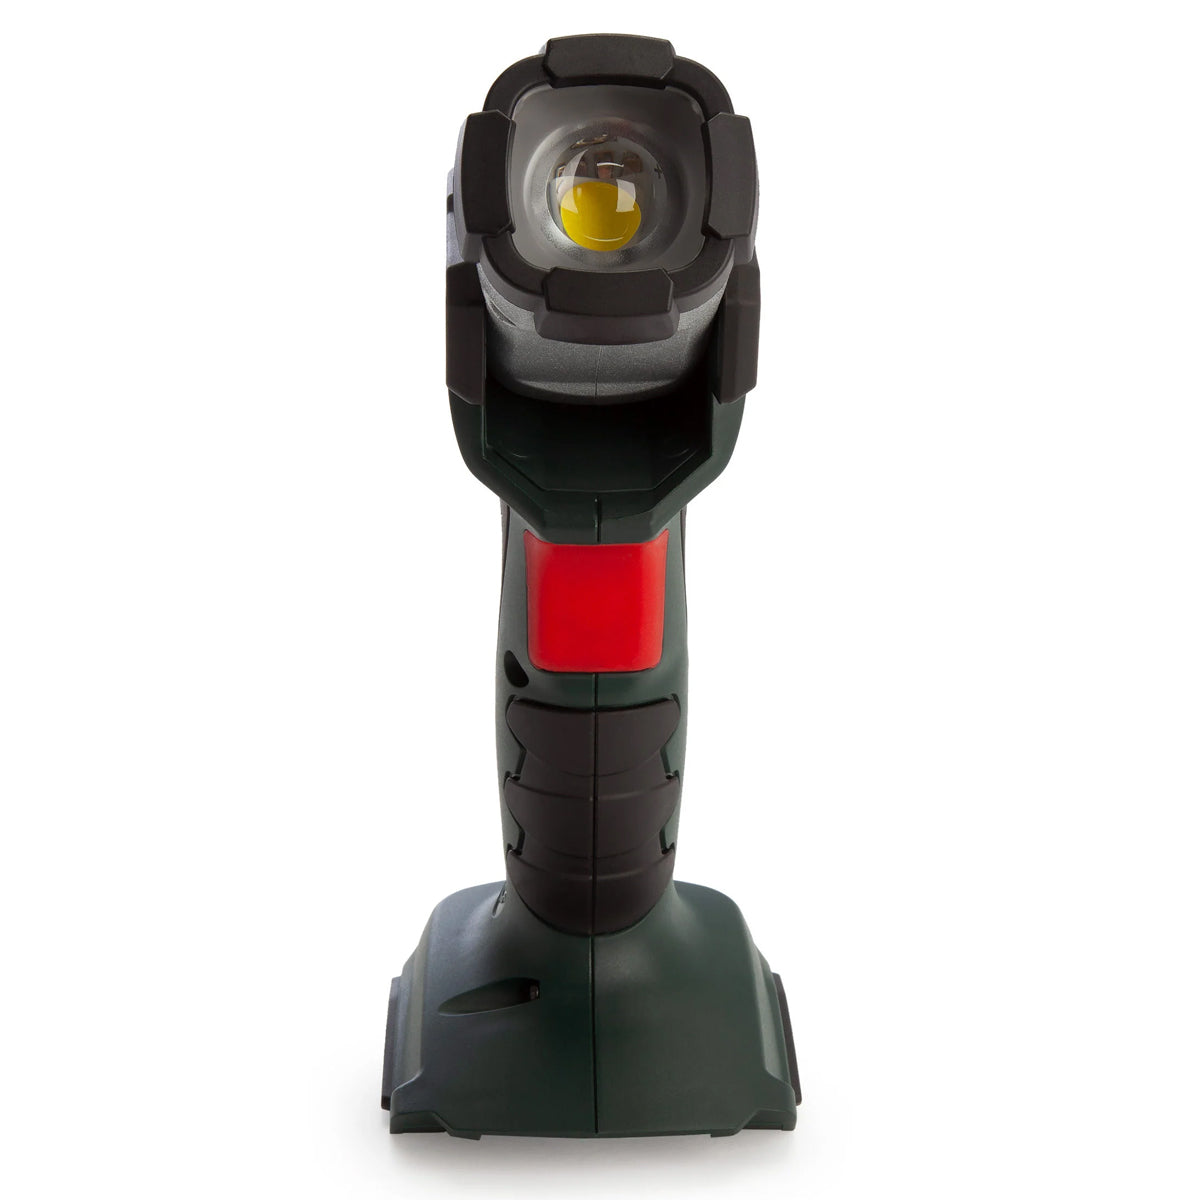 Metabo ULA 14.4-18V Portable LED Torch Body Only 600368000